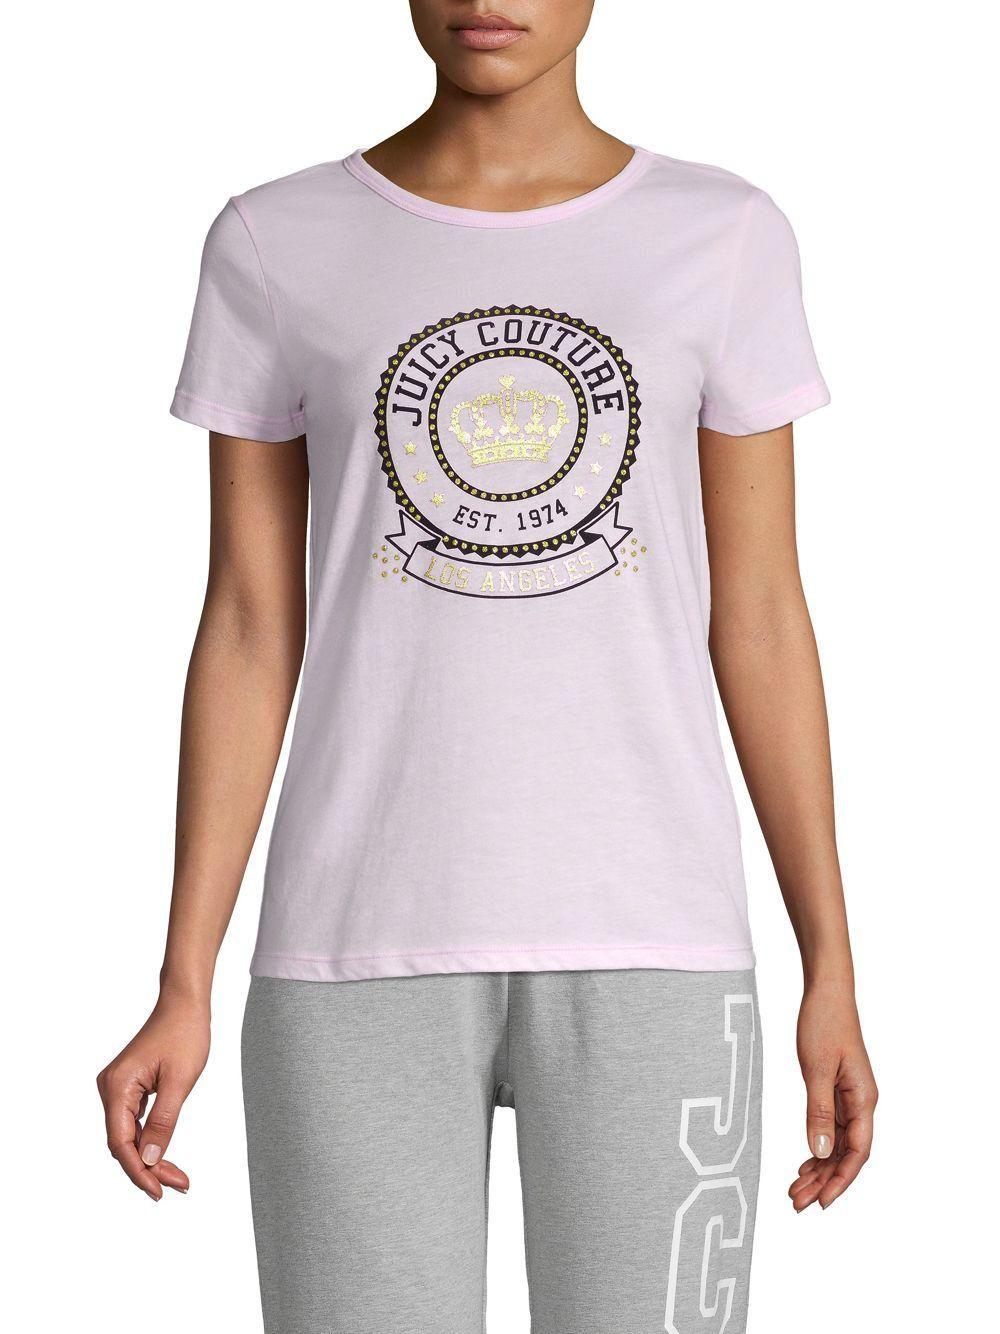 Juicy Couture Crown Logo - Juicy Couture Crown Logo Tee in Pink - Lyst